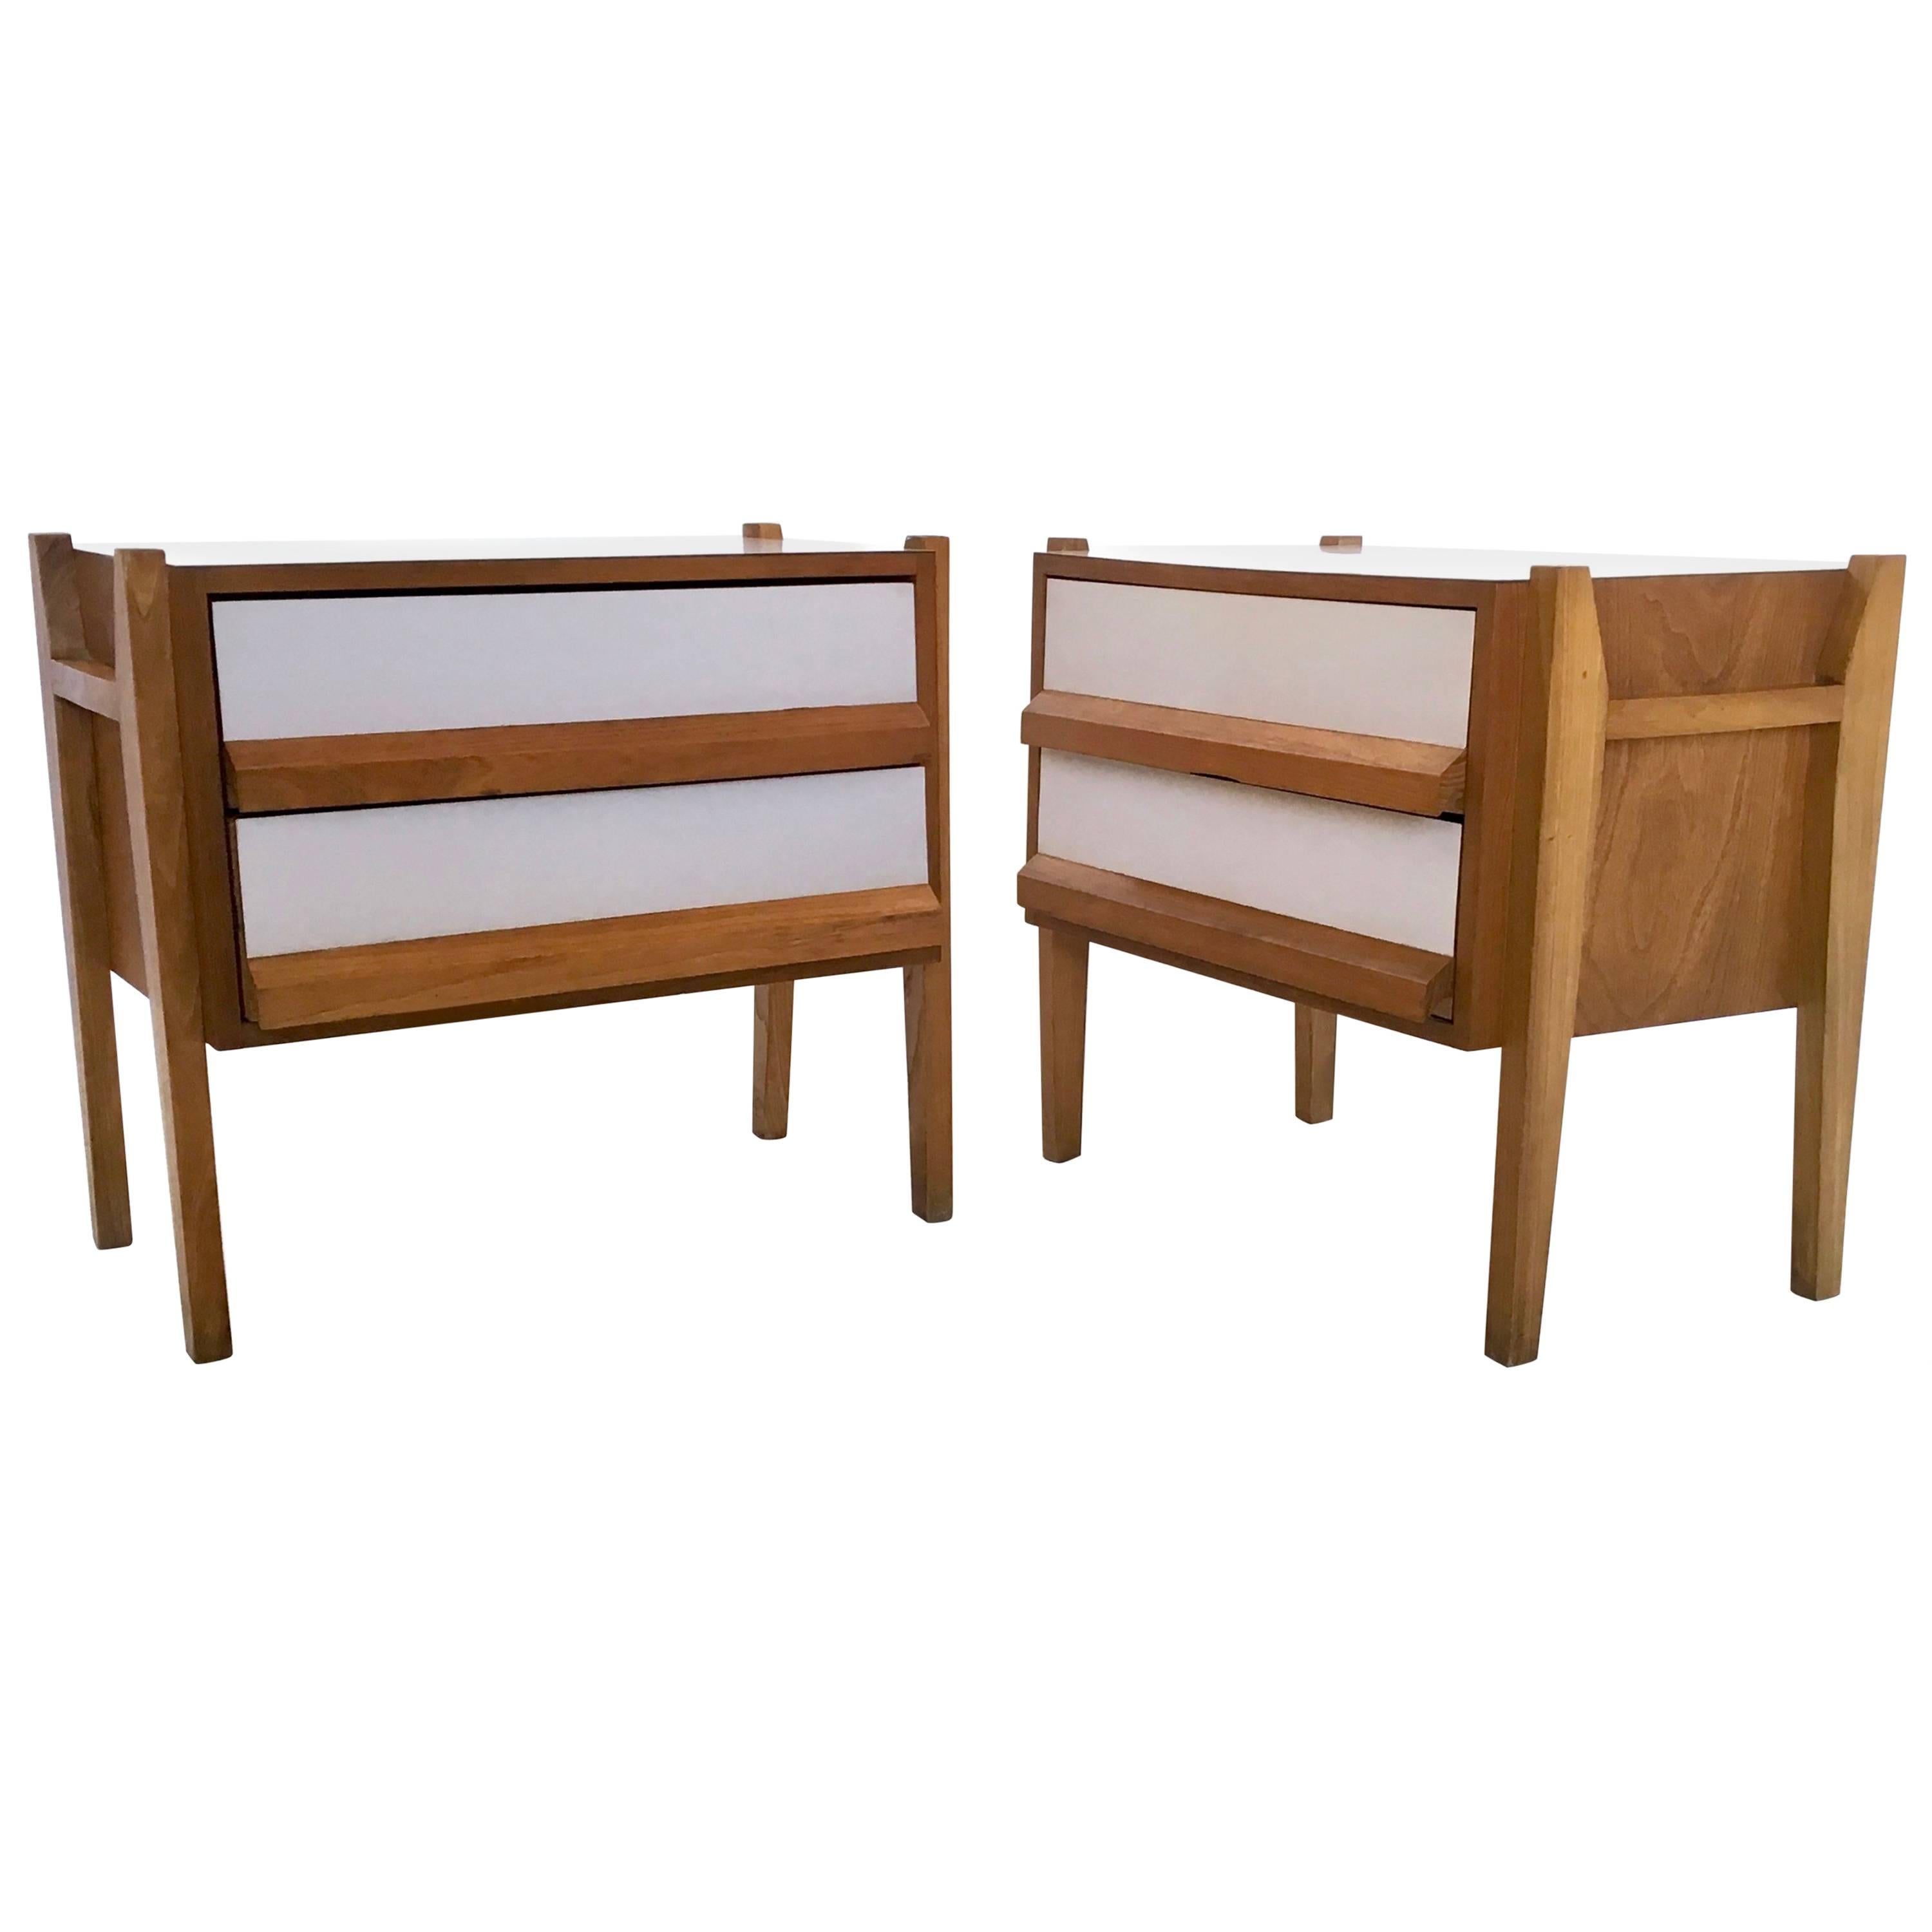 Italian Oak and Formica Bedside Tables, 1950s